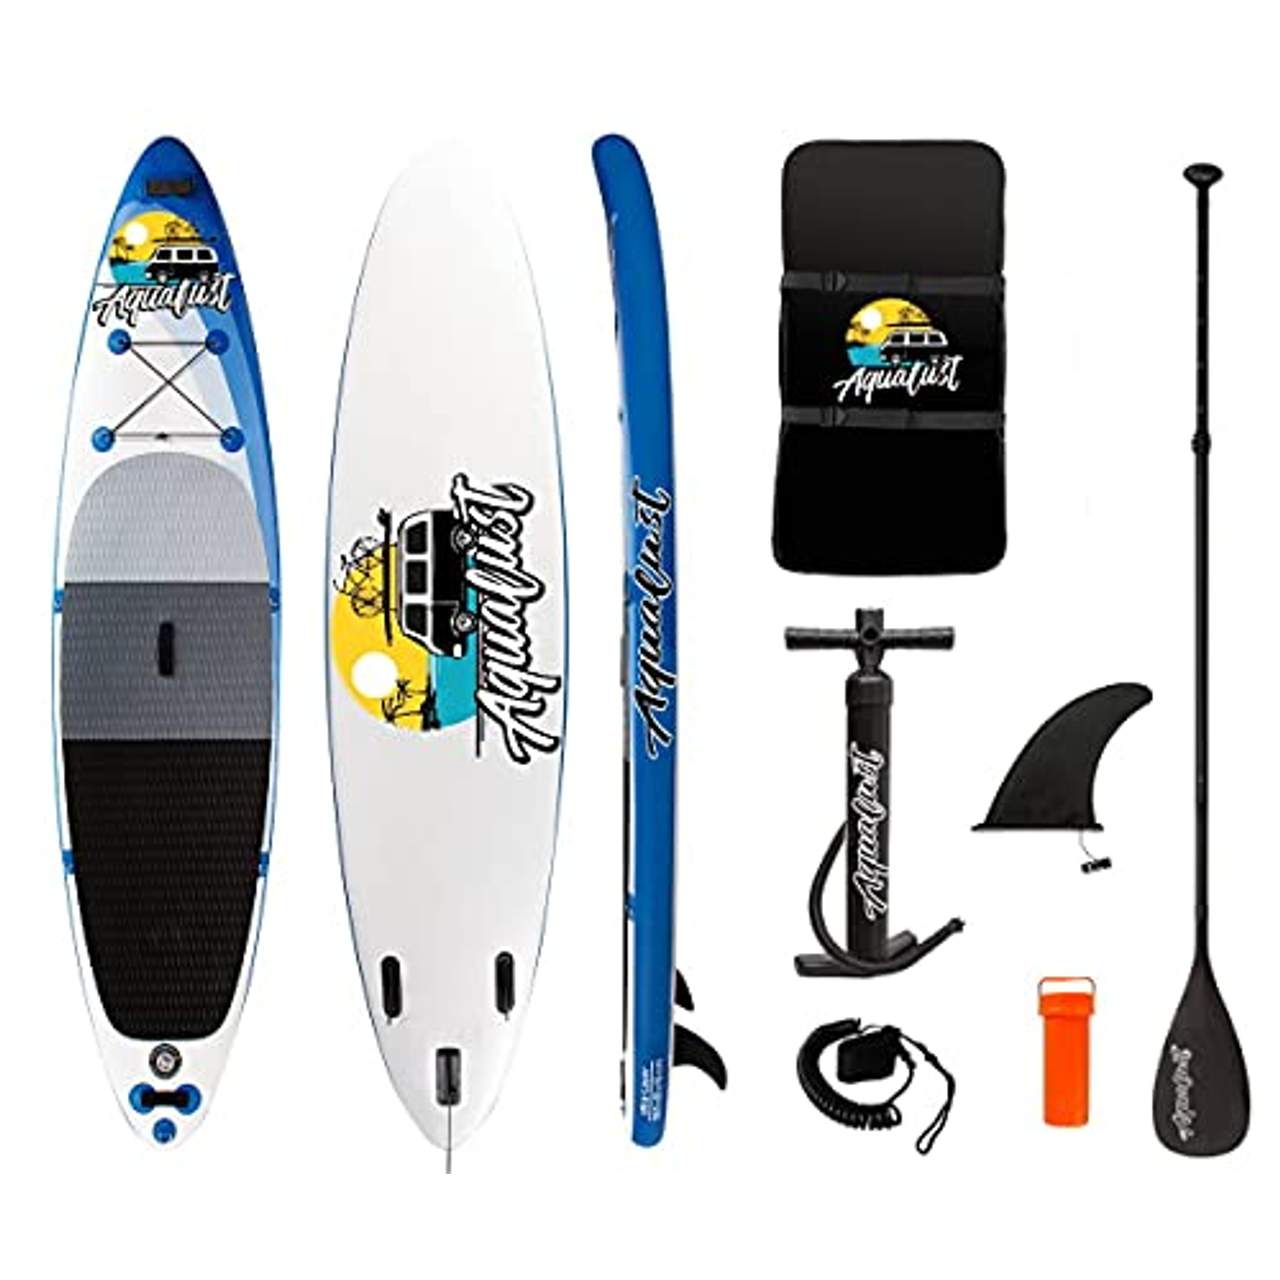 AQUALUST 12'0" SUP Board Stand Up Paddle Surf-Board BlueDrive S Power Fin Motor 